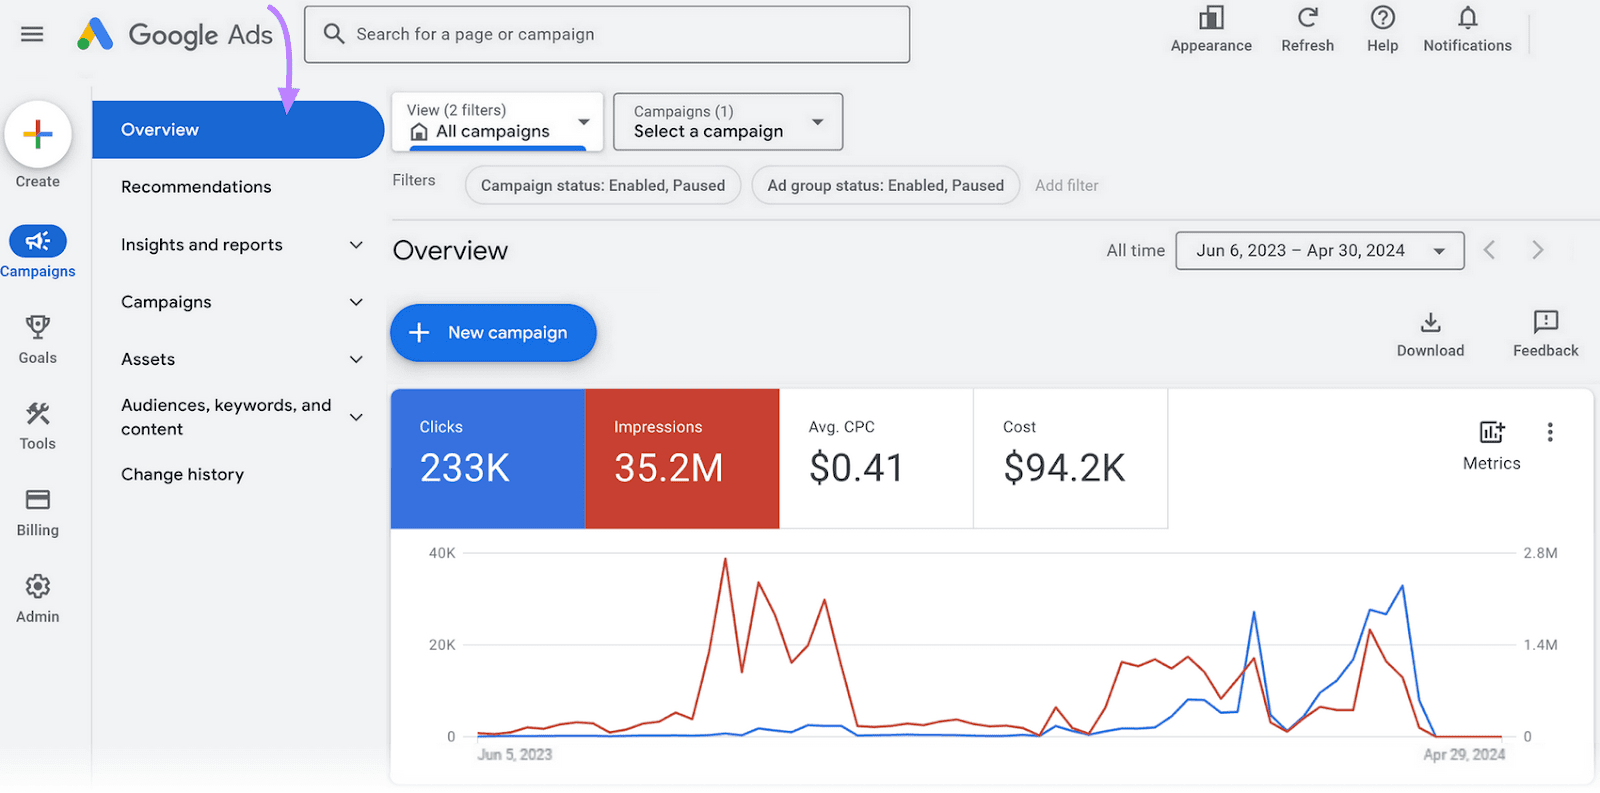 Google Ads dashboard showing the Overview tab with graphs for clicks and impressions over time.